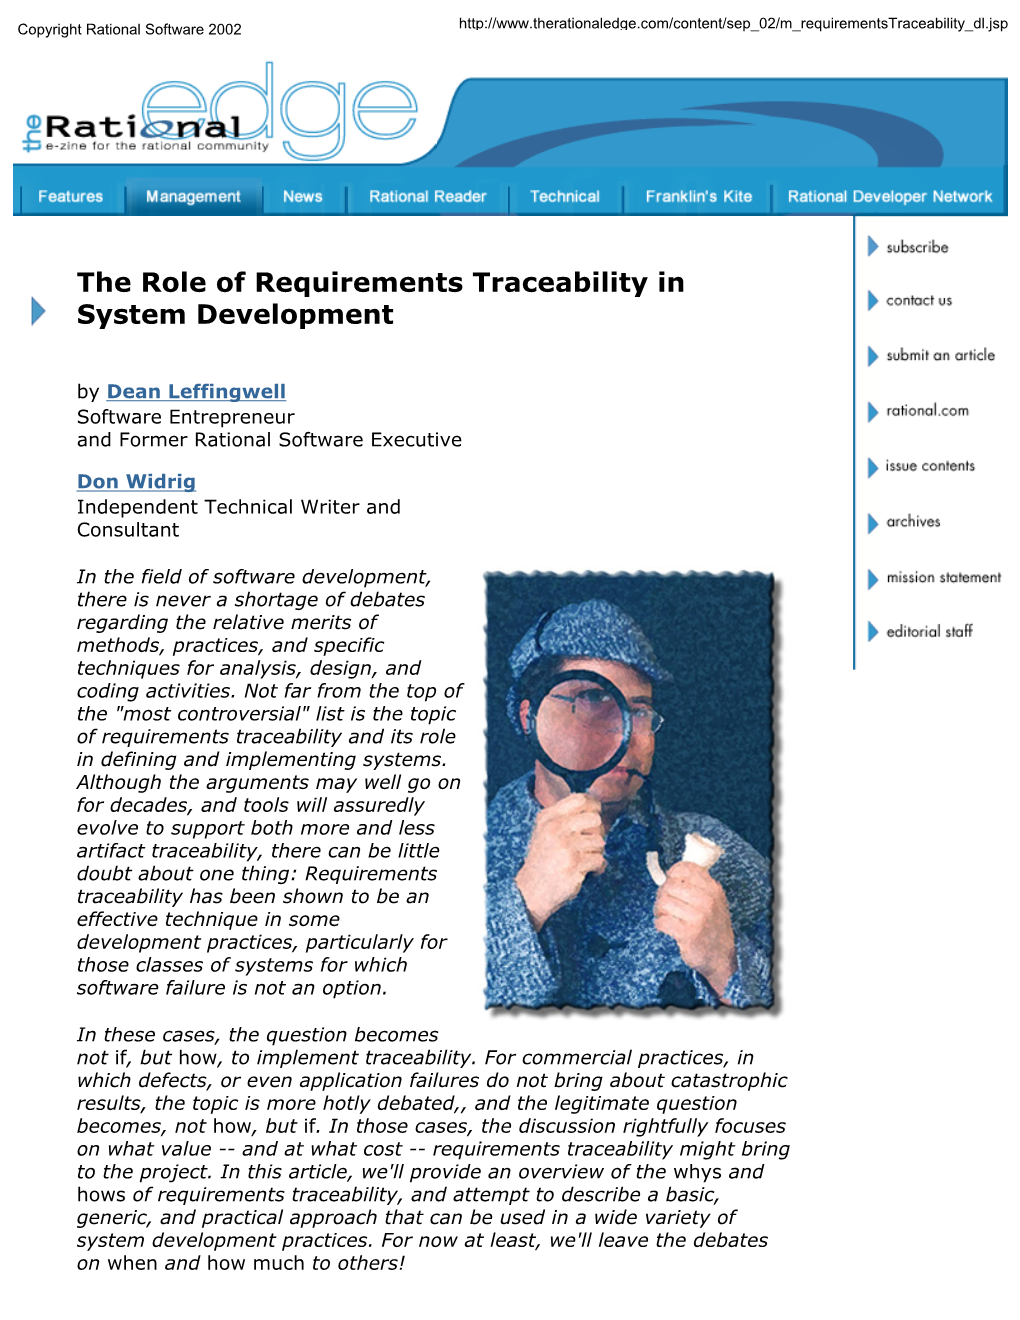 The Role of Requirements Traceability in System Development by Dean Leffingwell Software Entrepreneur and Former Rational Software Executive